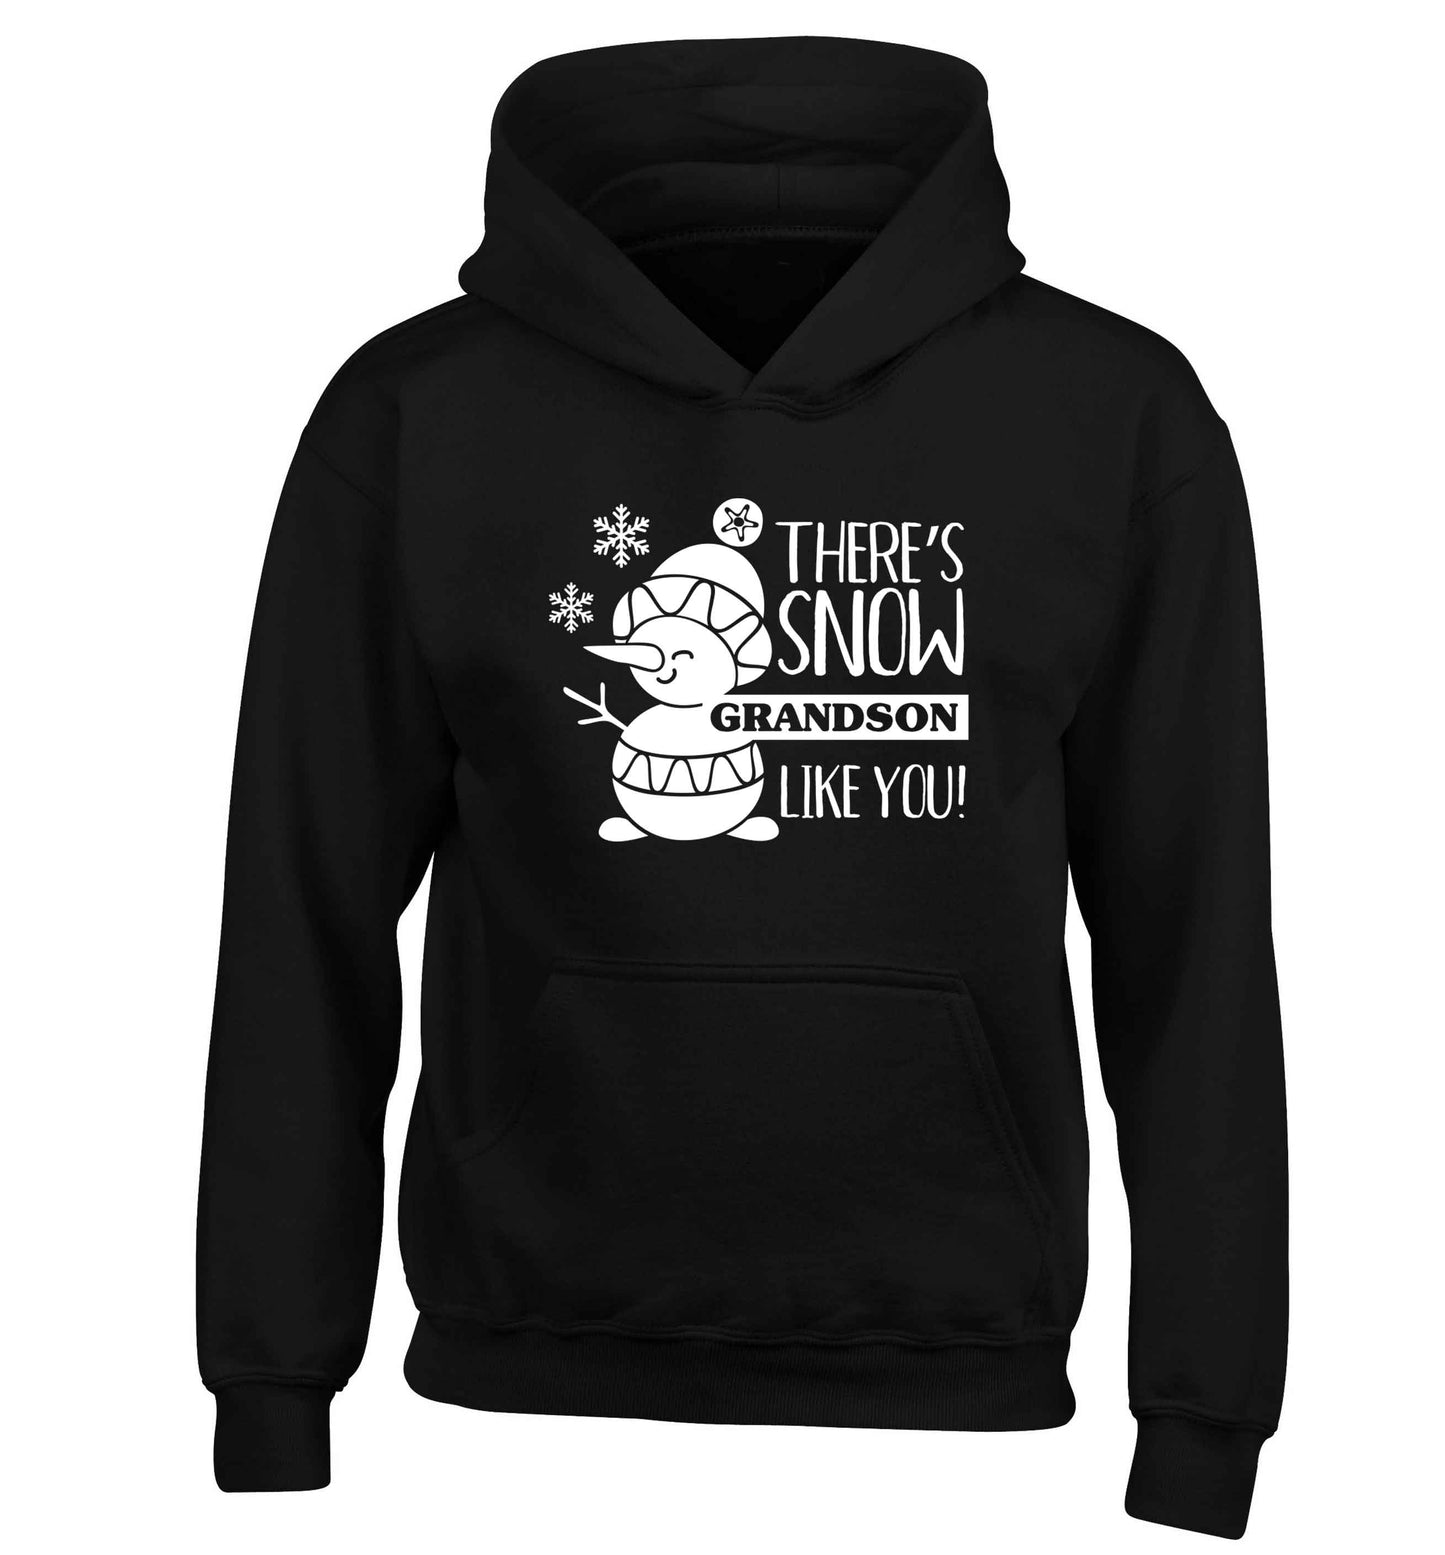 There's snow grandson like you children's black hoodie 12-13 Years